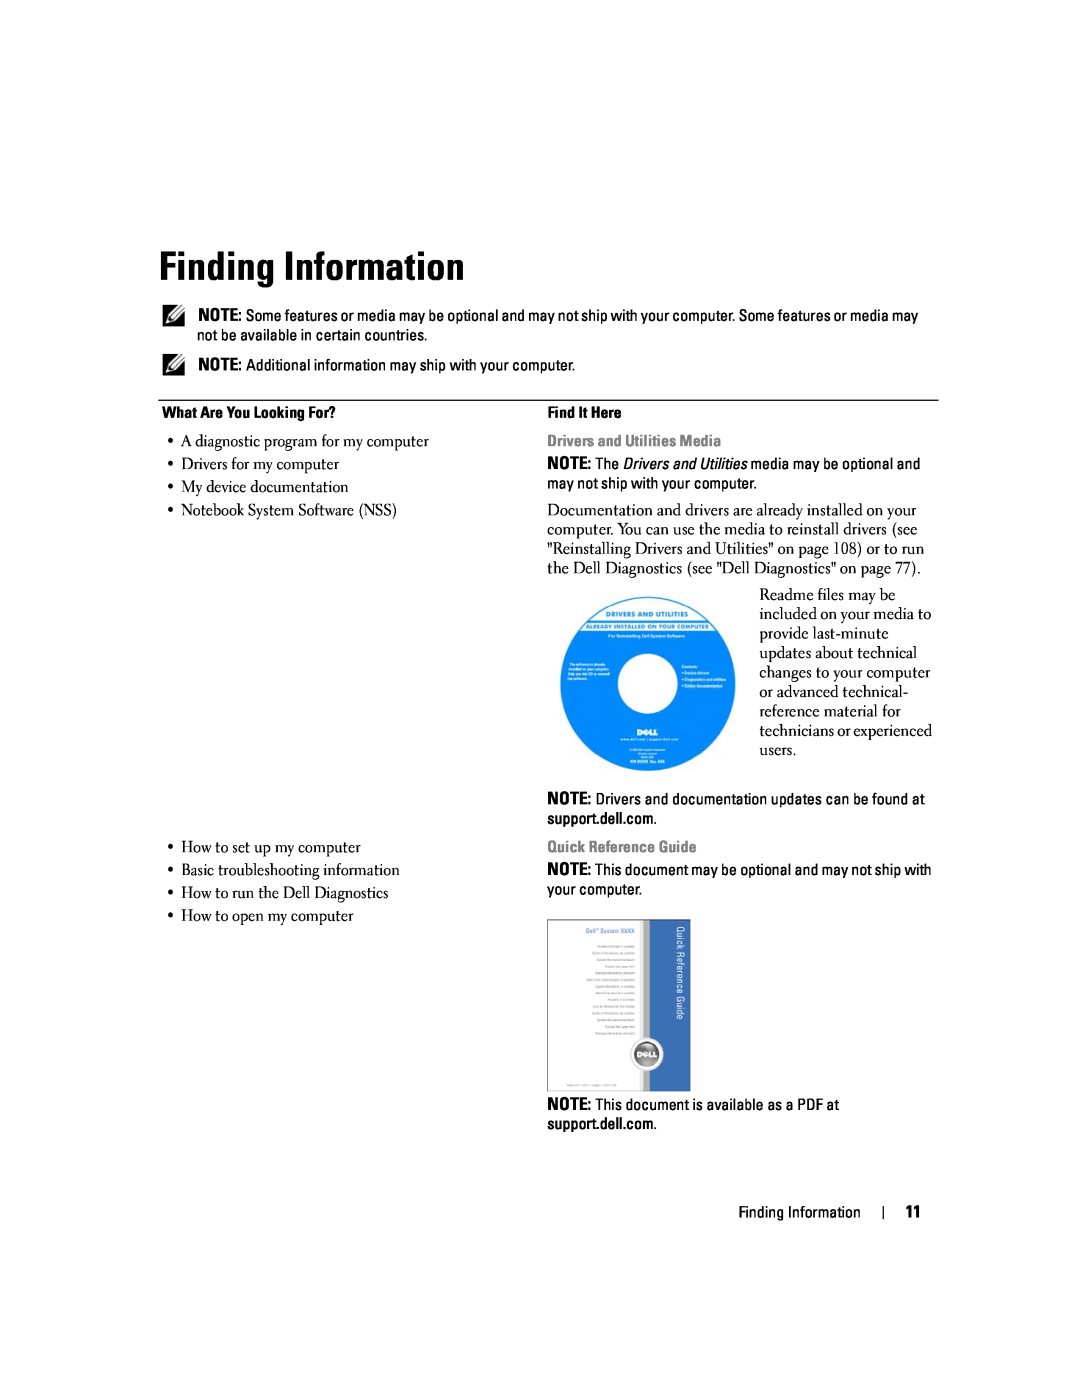 Dell PP24L manual Finding Information, Drivers and Utilities Media, Quick Reference Guide 